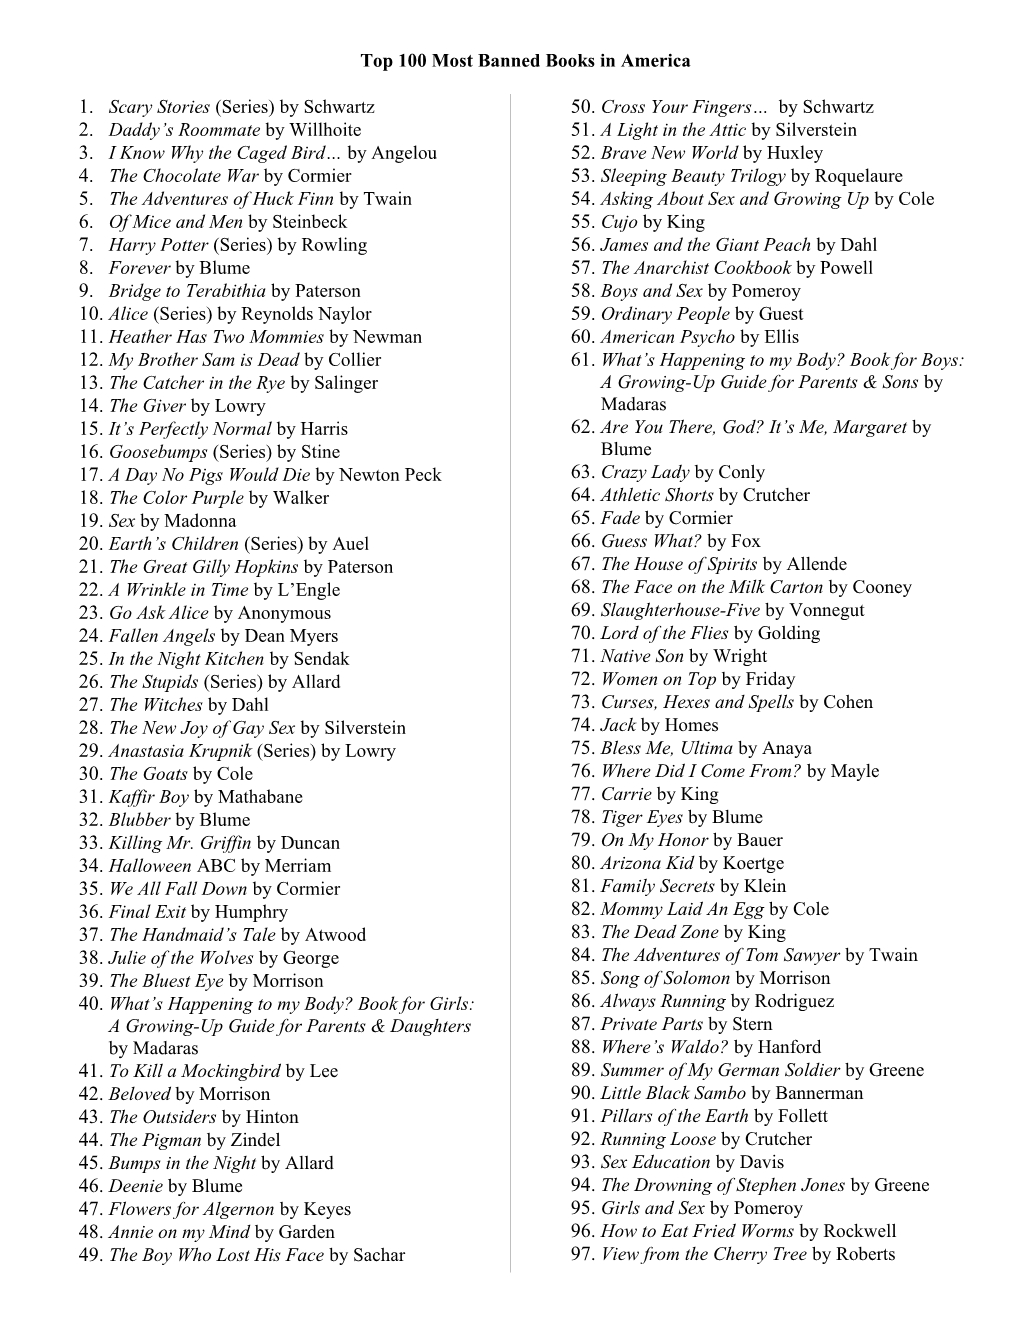 Top 100 Most Banned Books in America (2005)